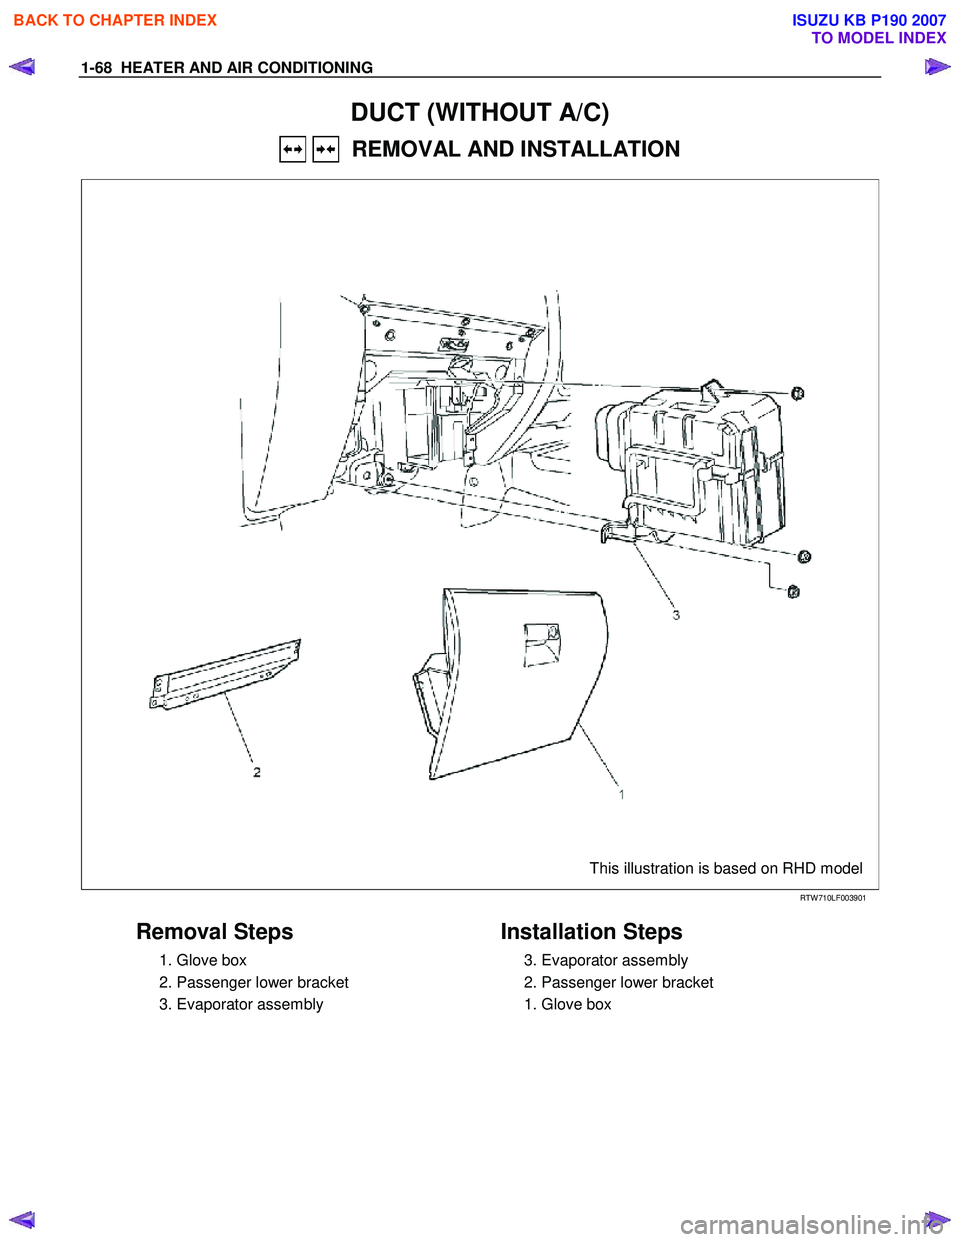 ISUZU KB P190 2007  Workshop Repair Manual 1-68  HEATER AND AIR CONDITIONING 
DUCT (WITHOUT A/C) 
   REMOVAL AND INSTALLATION 
   
 
 
 
 
 
 
 
 
  This illustration is based on RHD model   
RTW 710LF003901 
 
Removal Steps 
  1. Glove box  
